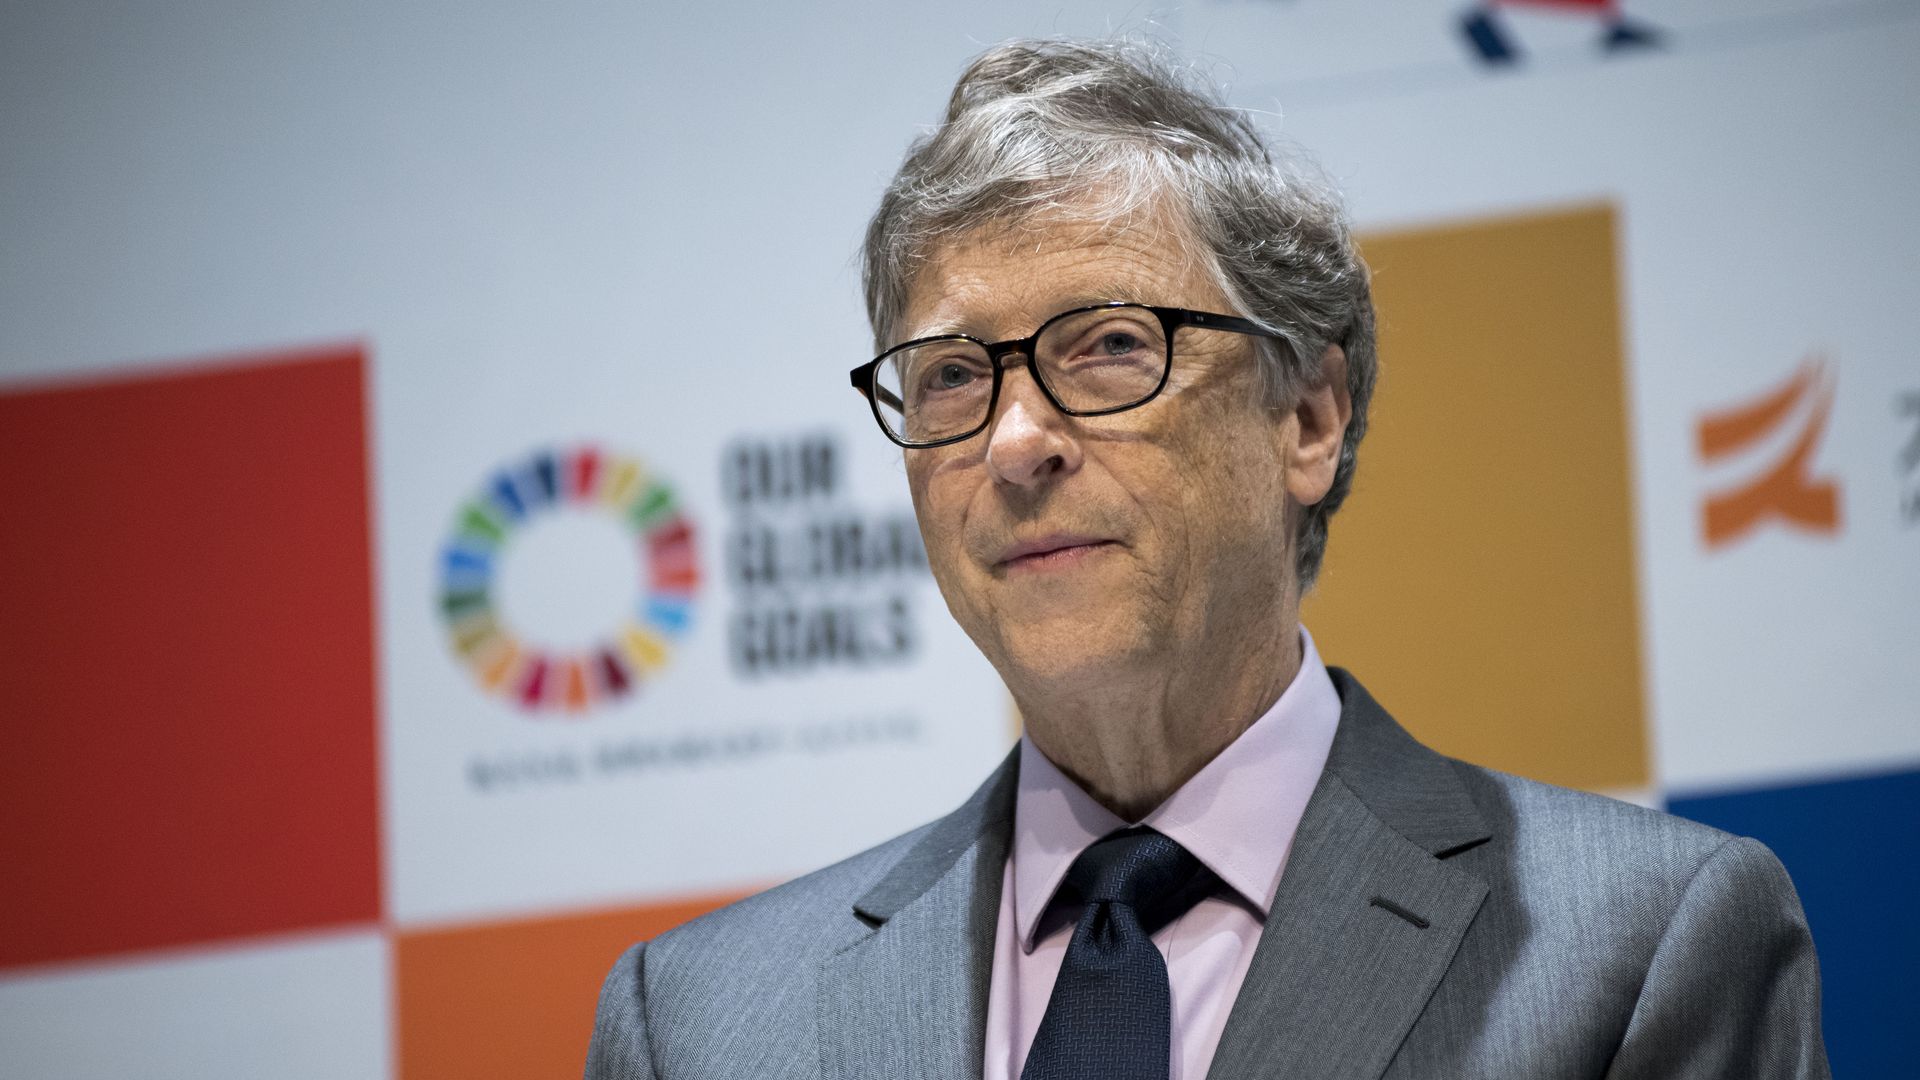  Bill Gates, co-Chairman of the Bill &amp; Melinda Gates Foundation, delivers a speech during a press conference in Tokyo, Japan, 09 November 2018. 